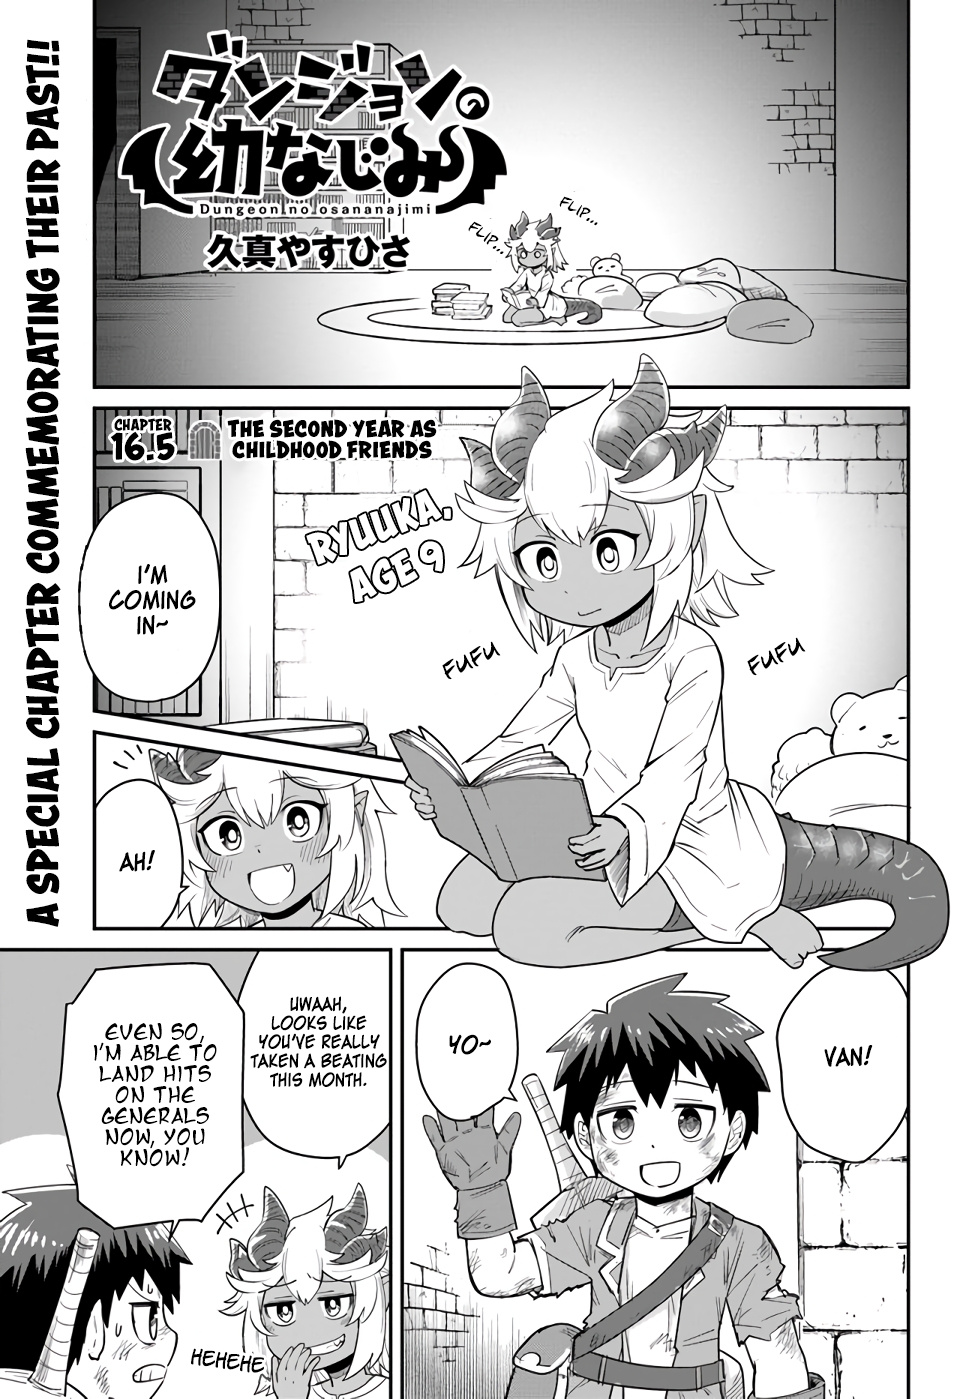 Dungeon No Osananajimi Chapter 16.5: The Second Year As Childhood Friends - Picture 1